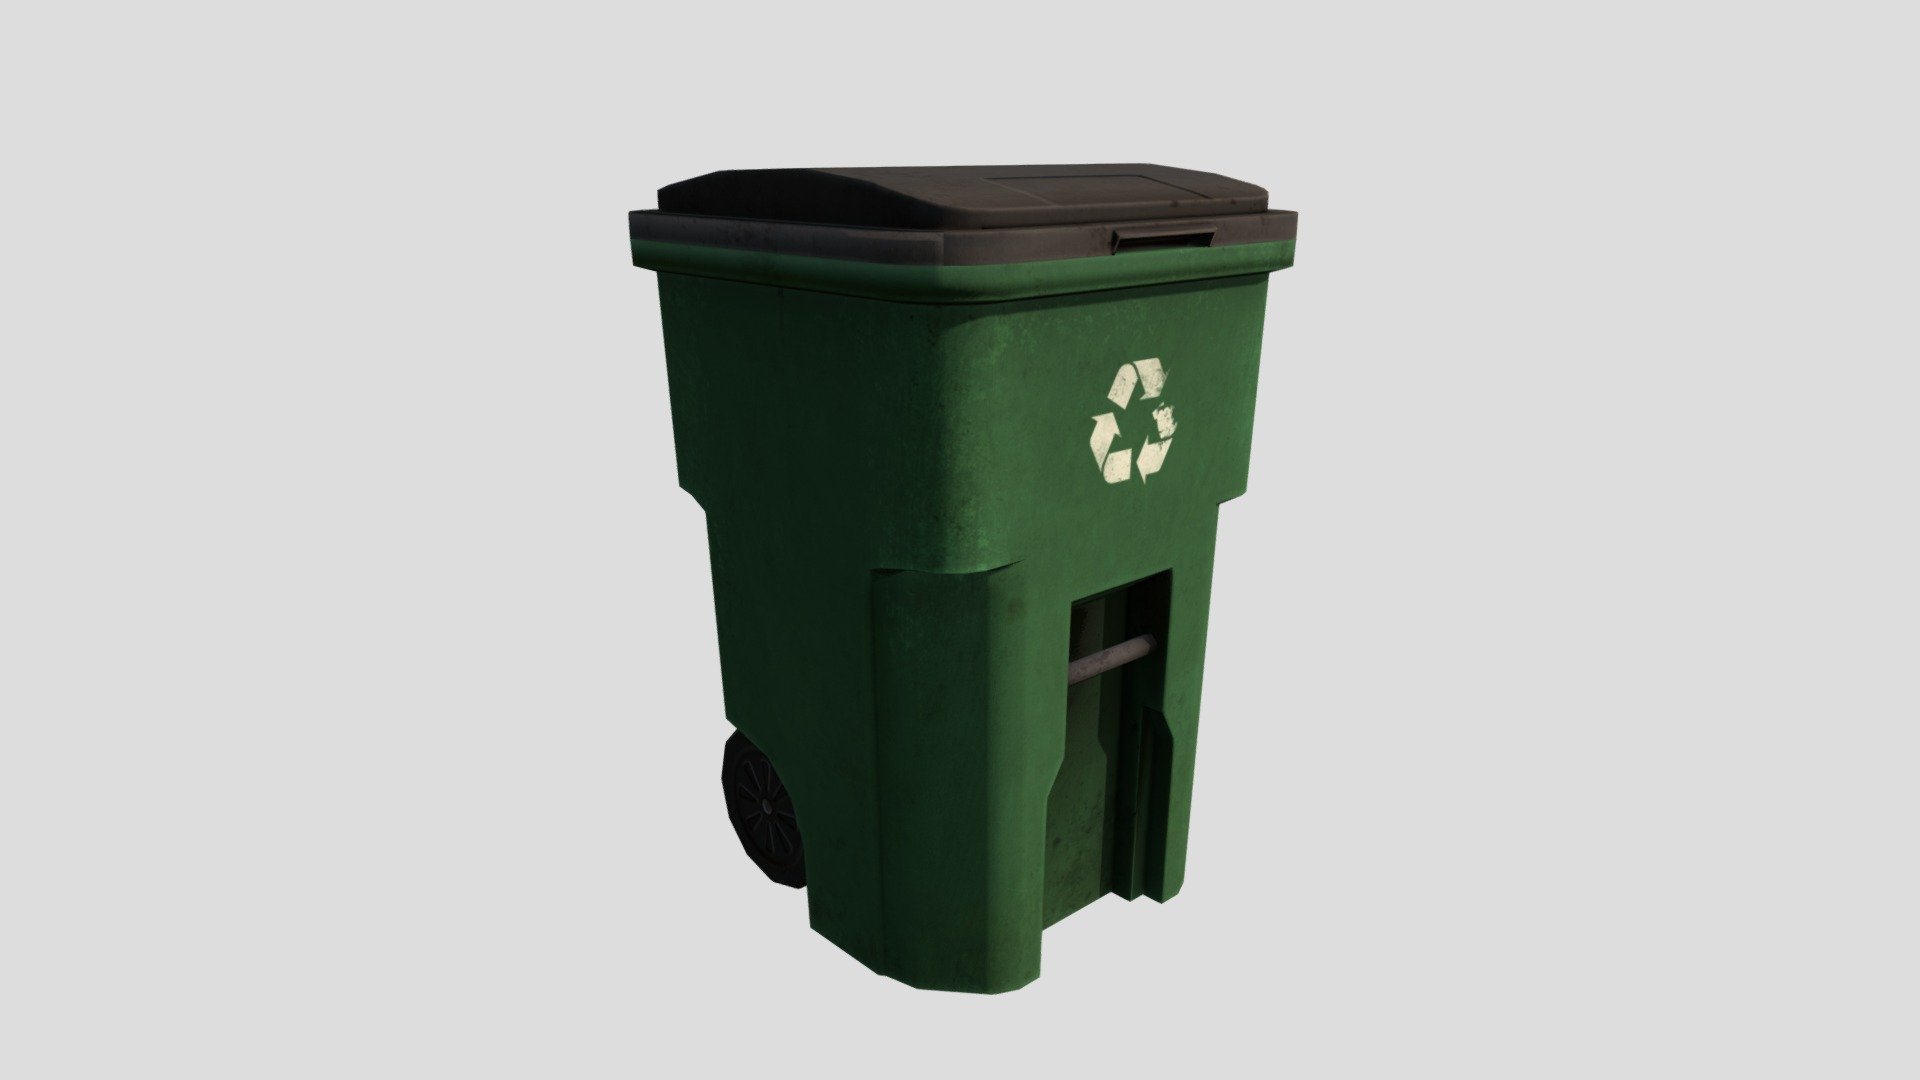 3D Trash Cans
The pack has highly detailed trash can ready for use in your project. Just drag and drop prefab into your scene and achieve beautiful results in no time. Available formats FBX, 3DS Max 2017



We are here to empower the creators. Please contact us via the [Contact US](https://aaanimators.com/#contact-area) page if you are having issues with our assets. 




The following document provides a highly detailed description of the asset:
[READ ME]()




**Mesh complexities:**


Trashcan_04 1124 verts; 1276 tris uv 

Trashcan_04_cap 350 verts; 408 tris uv 



Includes 1 sets of textures with 4 materials:



● Diffuse

● Gloss

● Normal

● Specular - Trashcan_04 - Buy Royalty Free 3D model by aaanimators 3d model